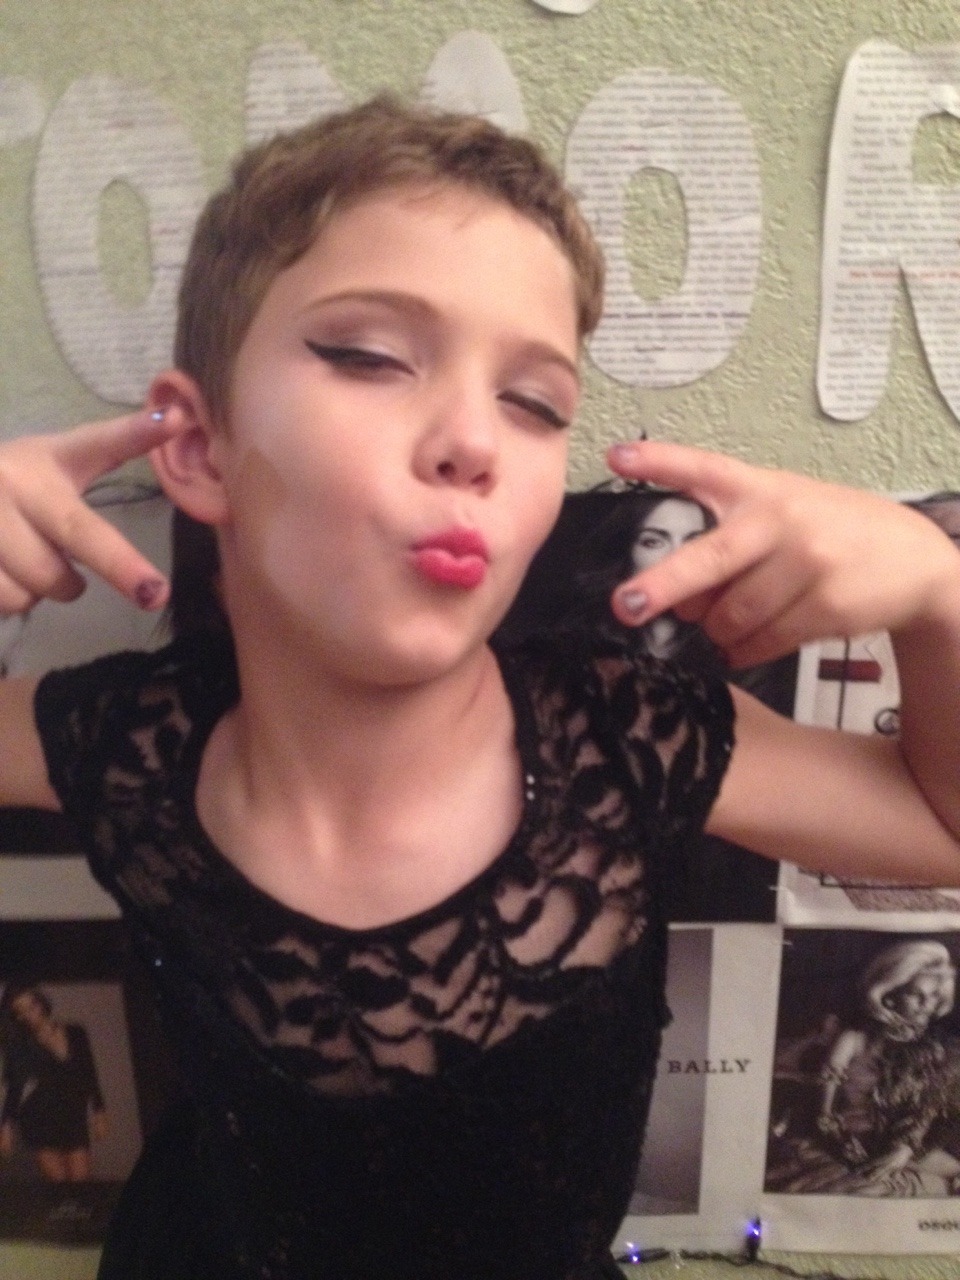 wanduh-lust:  yowgert:  Meet my little brother Jamie, he’s 8 years old and loves